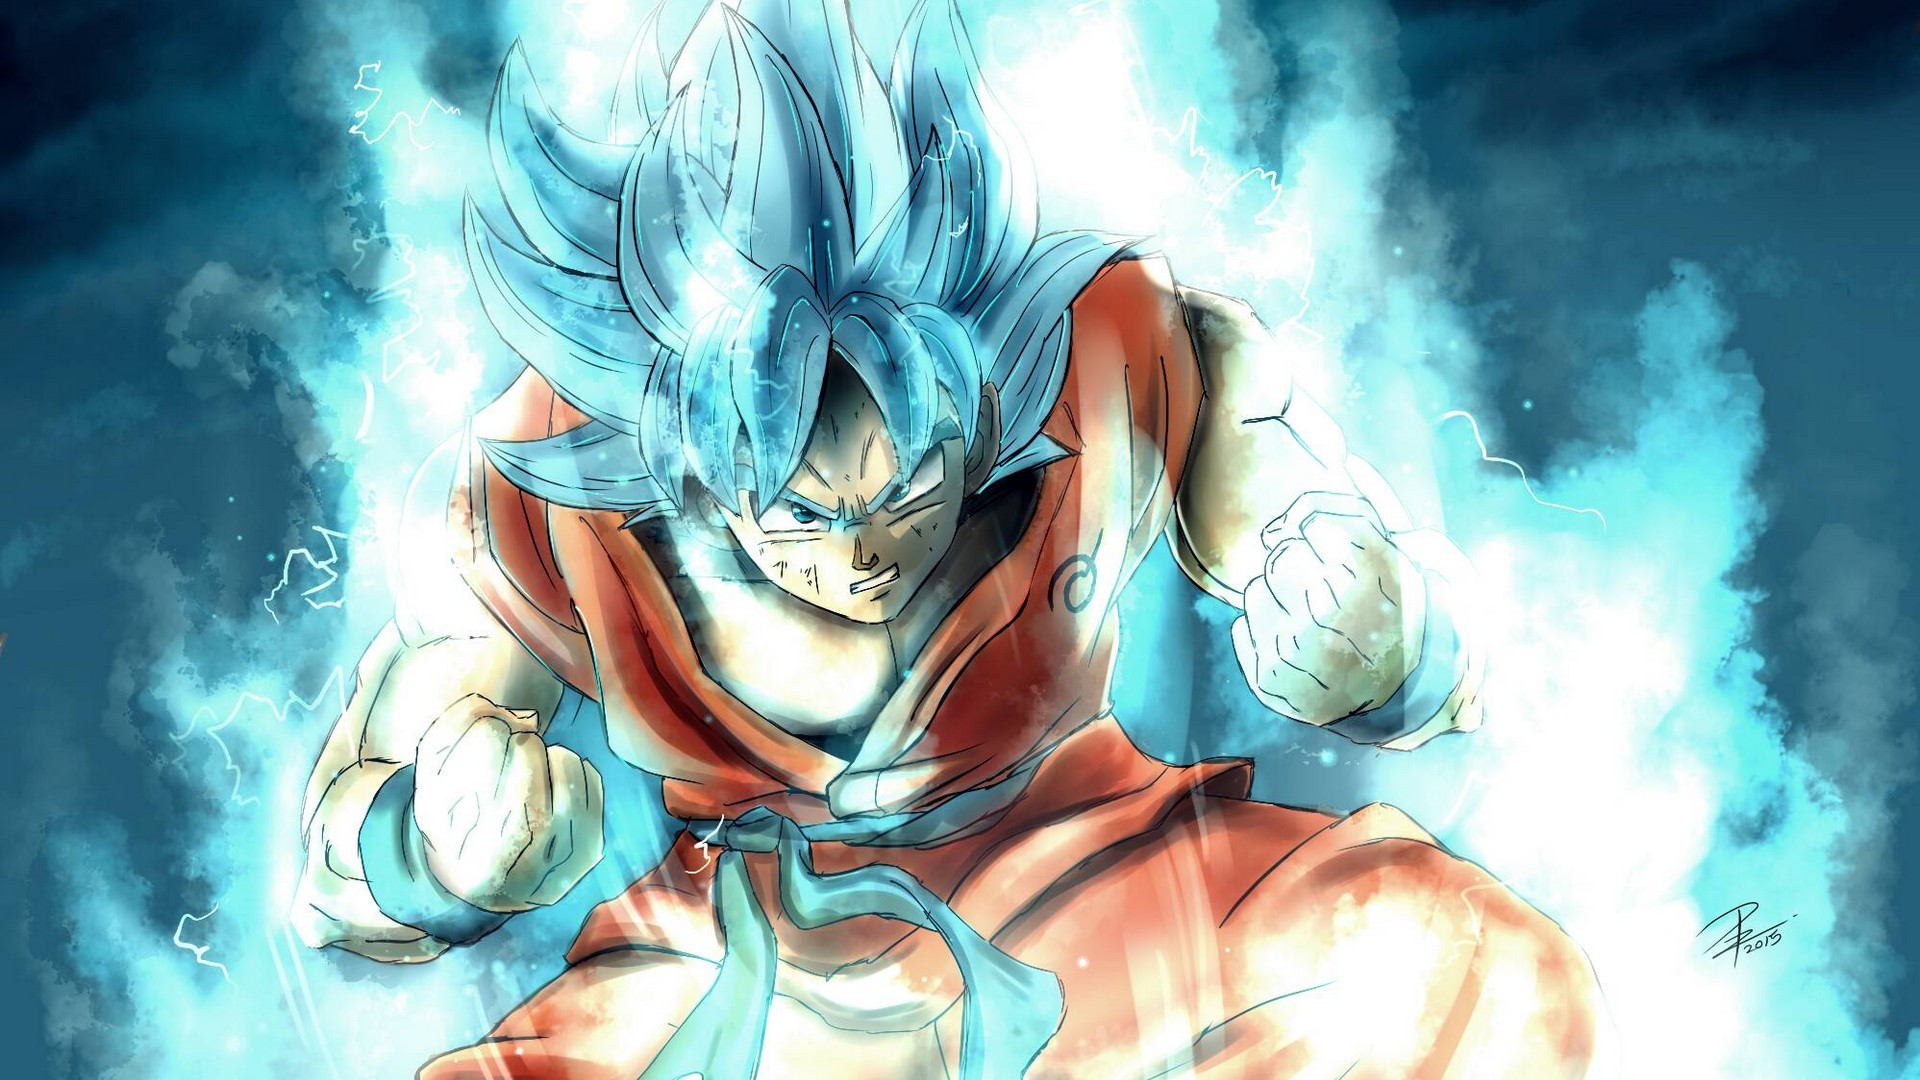 Best Goku SSJ Blue Wallpaper HD With Resolution 1920X1080 pixel. You can make this wallpaper for your Desktop Computer Backgrounds, Mac Wallpapers, Android Lock screen or iPhone Screensavers